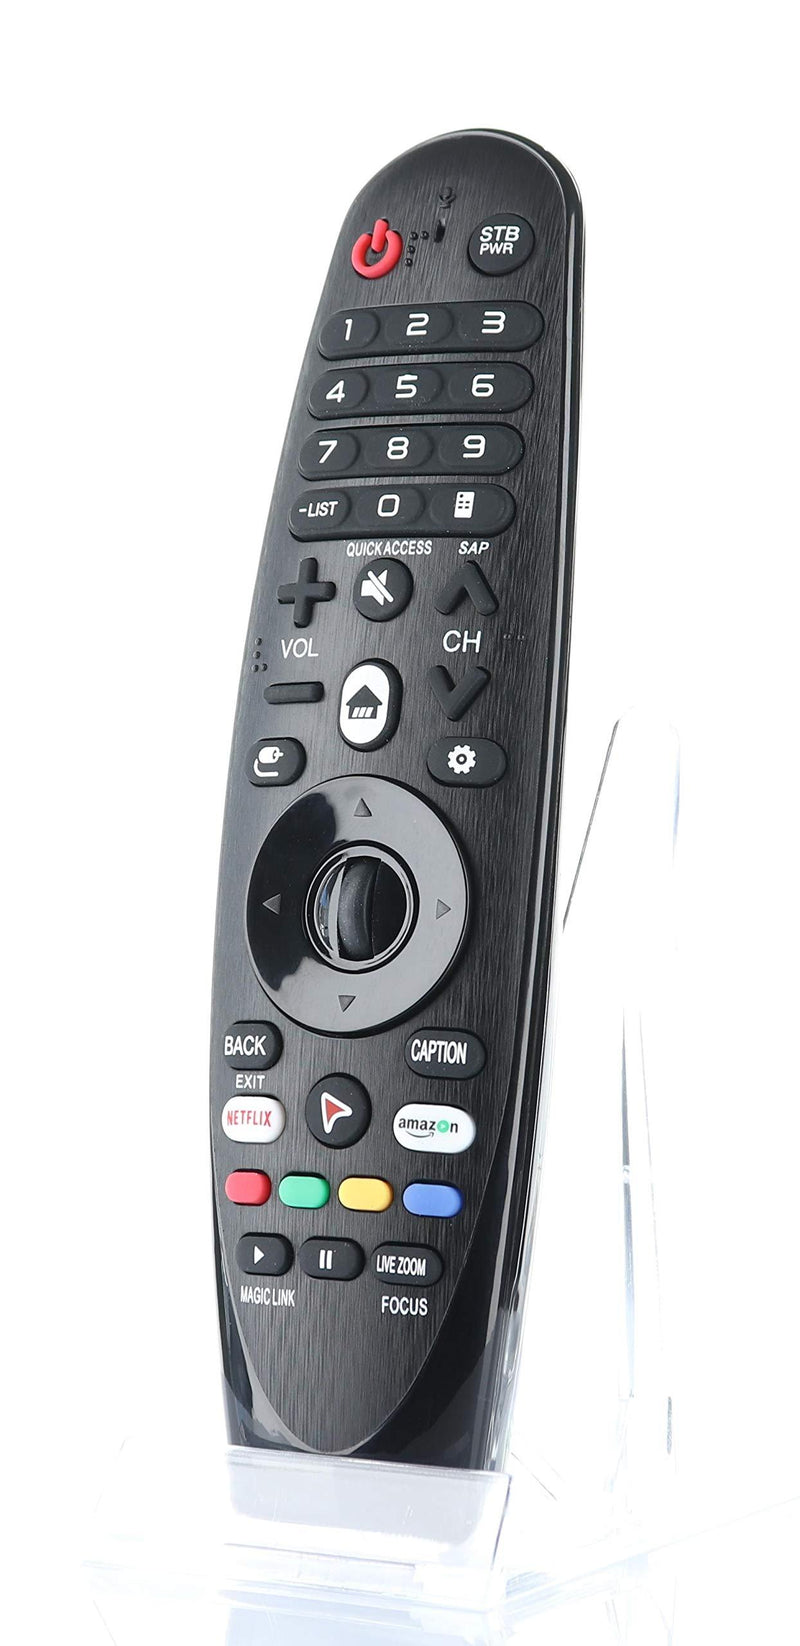 Anderic ANMR600 Magic Remote for LG Smart TV AN-MR600 with Pointer, Netflix, & App Keys Replaces AN-MR600G. AN-MR650, AN-MR650G, ANMR650A, ANMR600, AN-MR650B, AN-MR19BA, AN-MR18BA